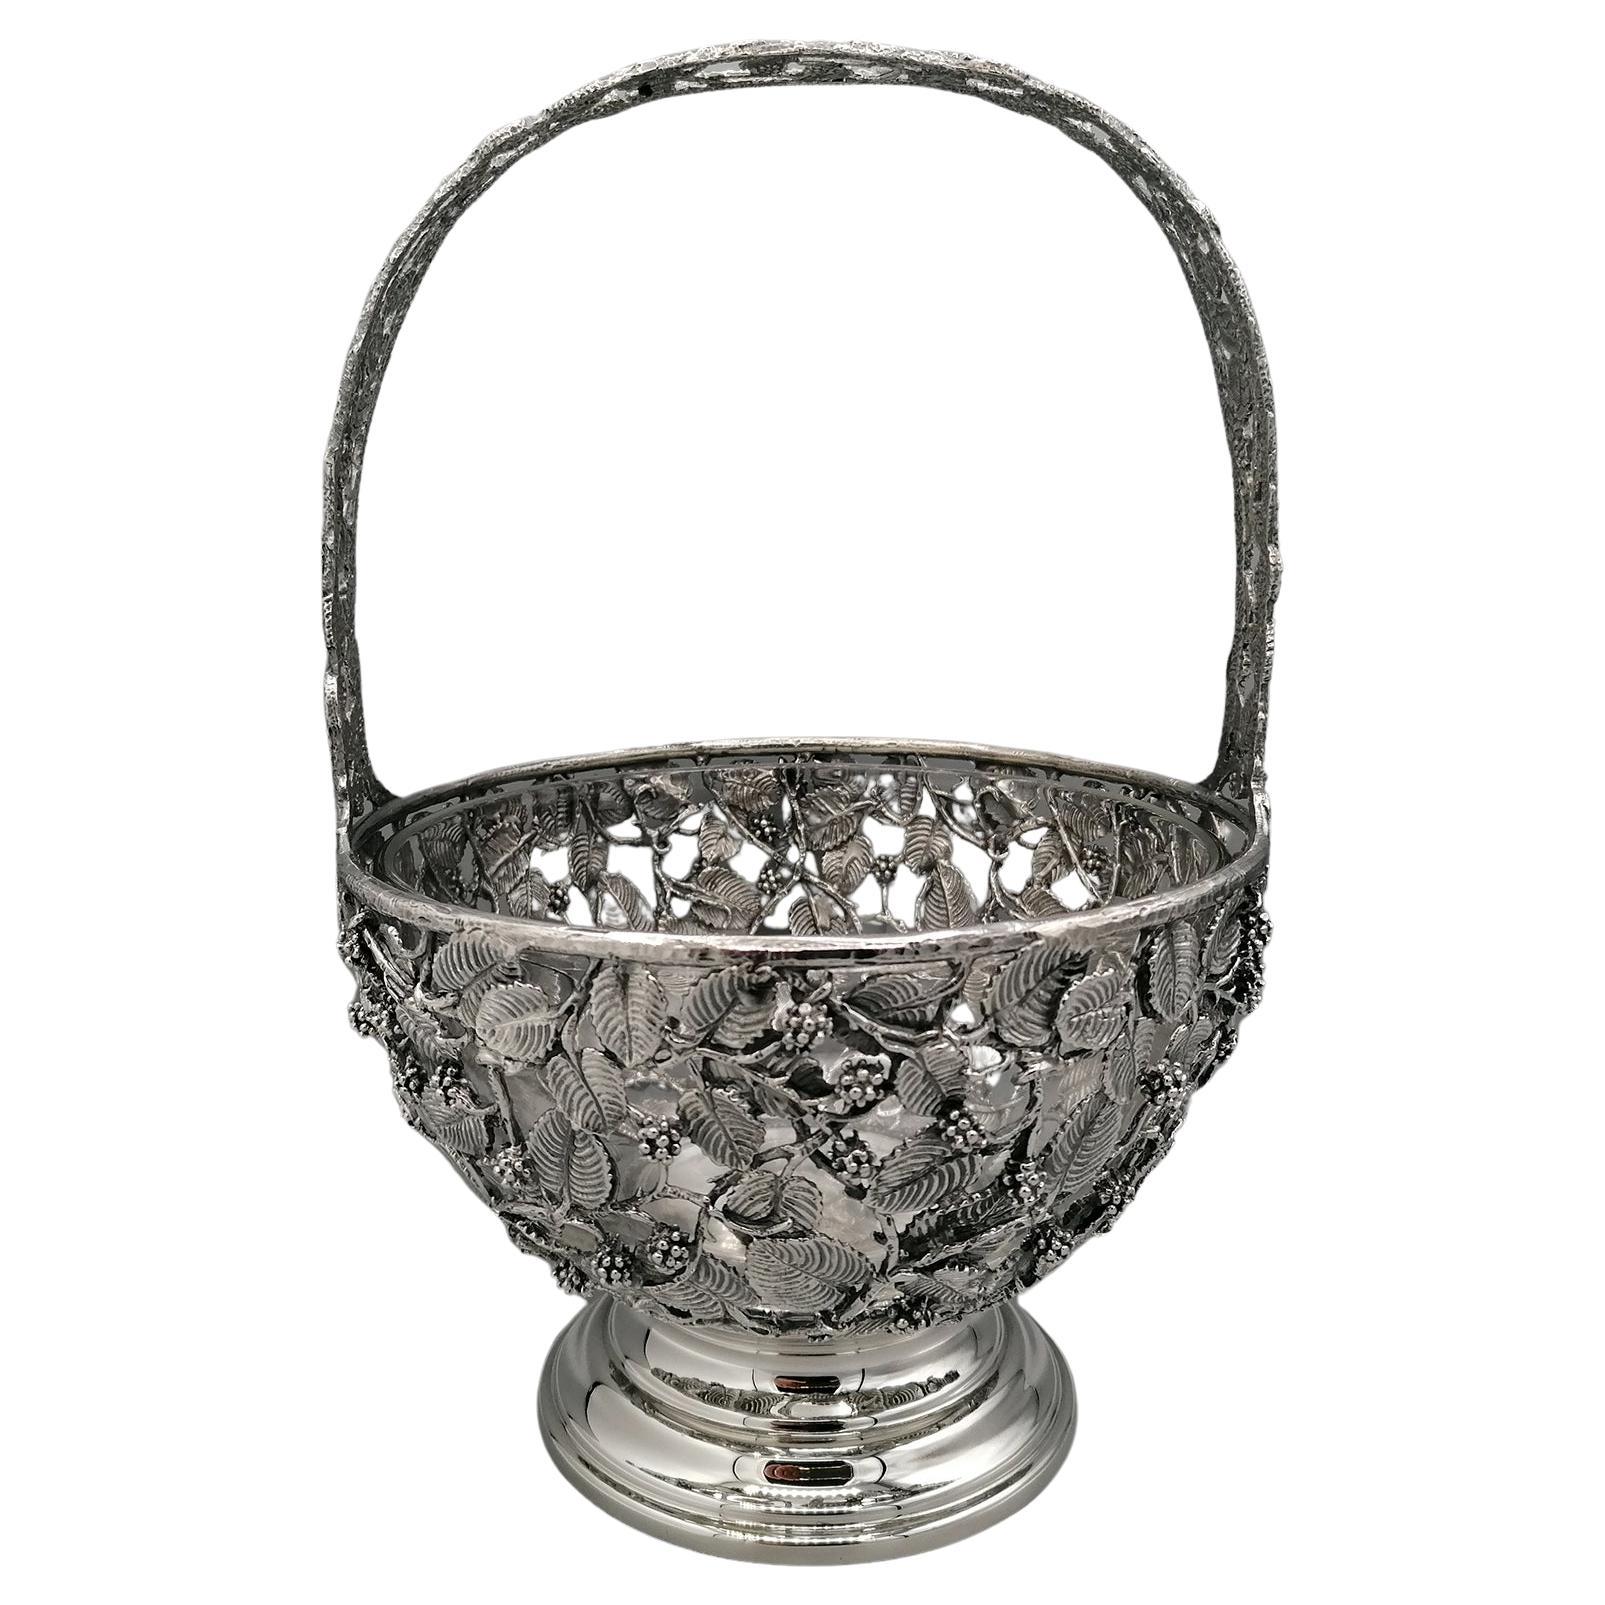 20th Century Italian Basket  sterling silver pierced with blackberries and leaves.  For Sale